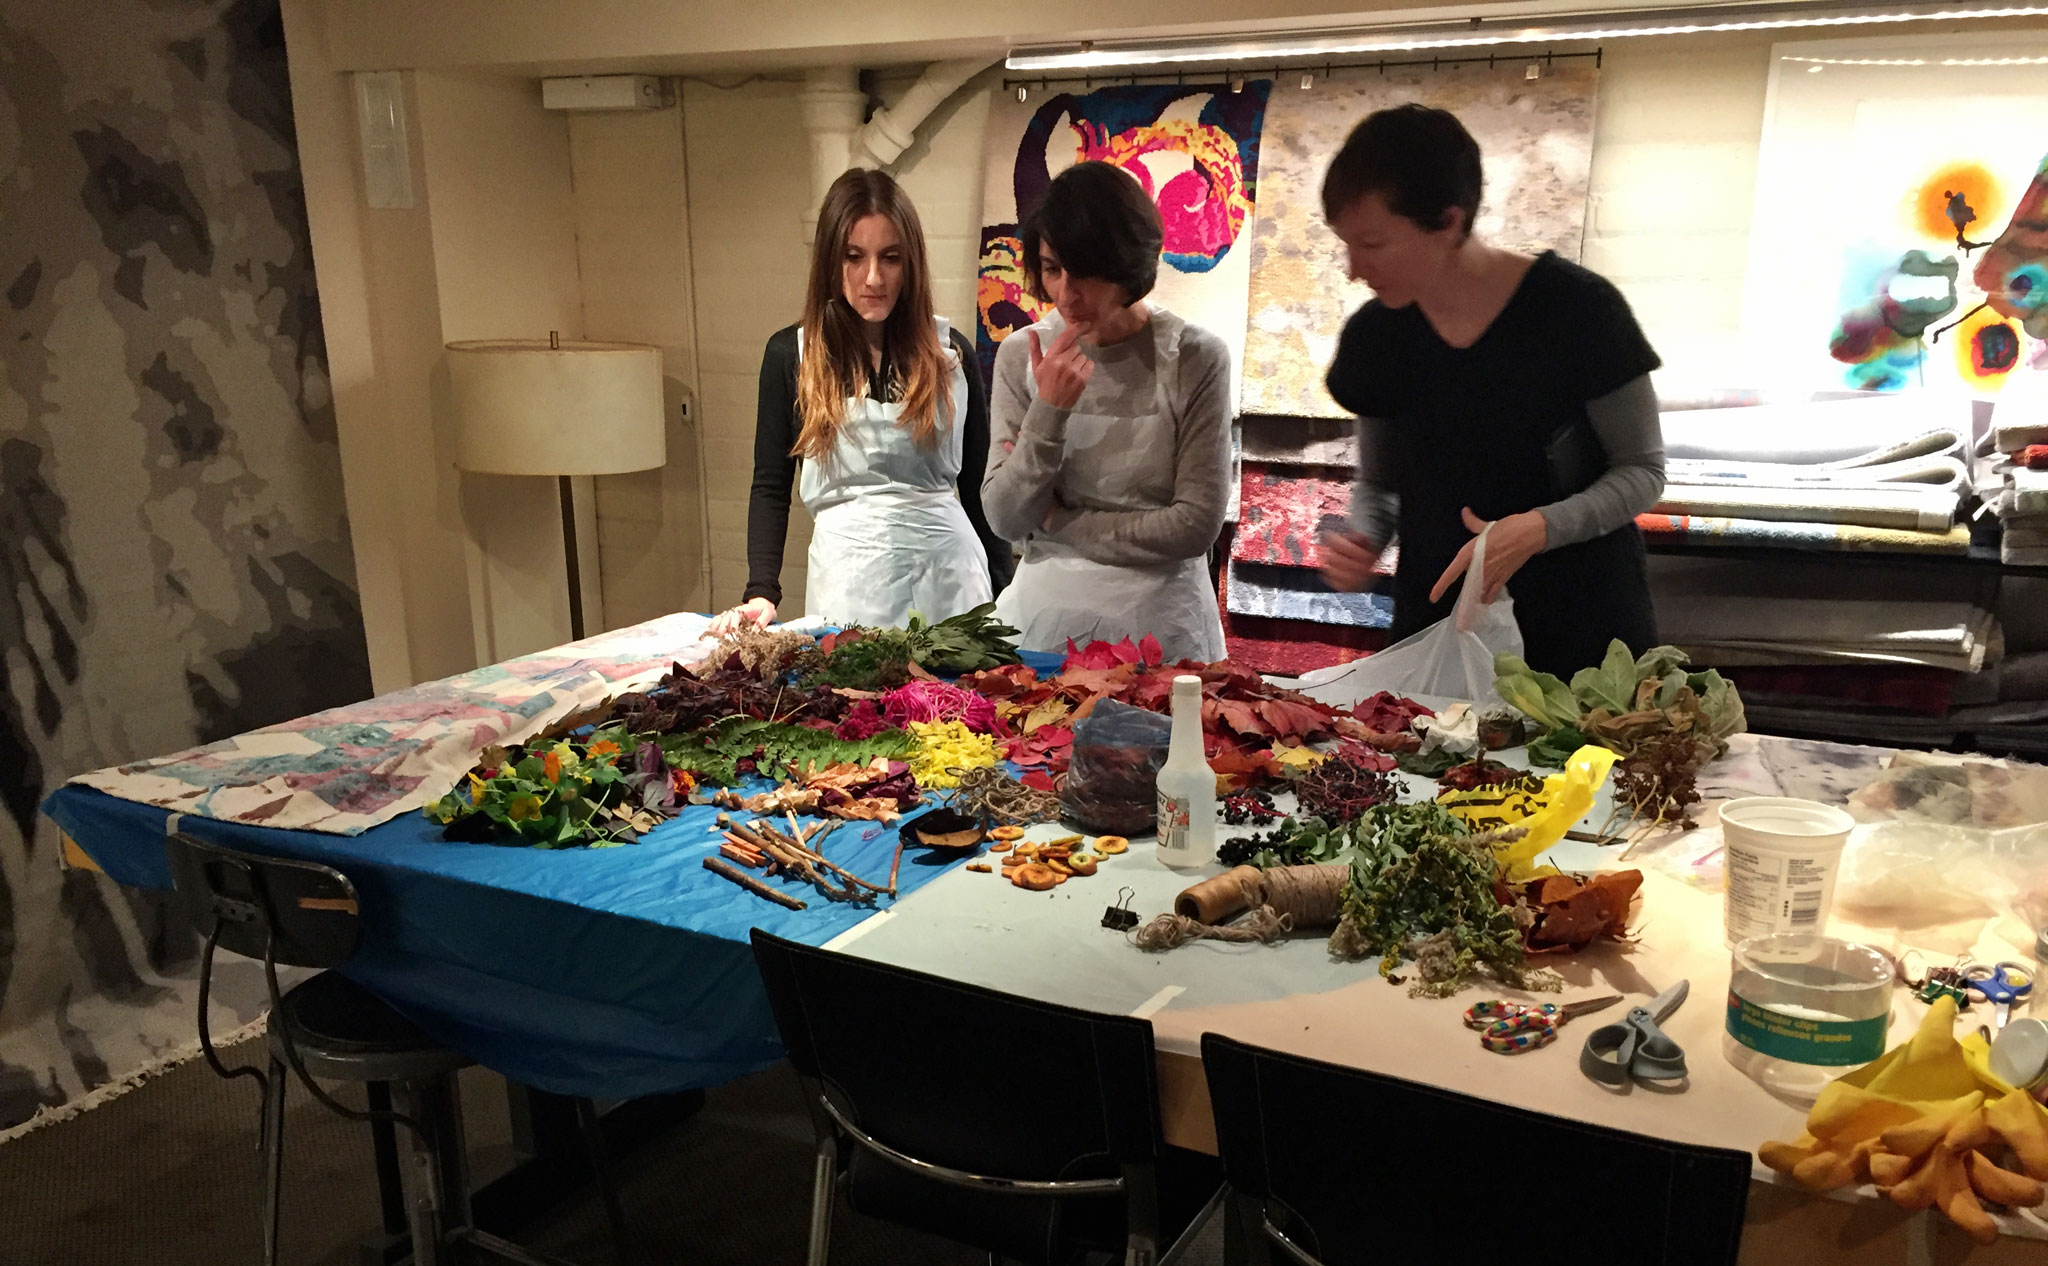 Some of the staff of Creative Matters reviewing the flowers, berries, sticks, and other natural items before the start of the Natural Dyes Art Day, 7 November 2016. | Image by The Ruggist.